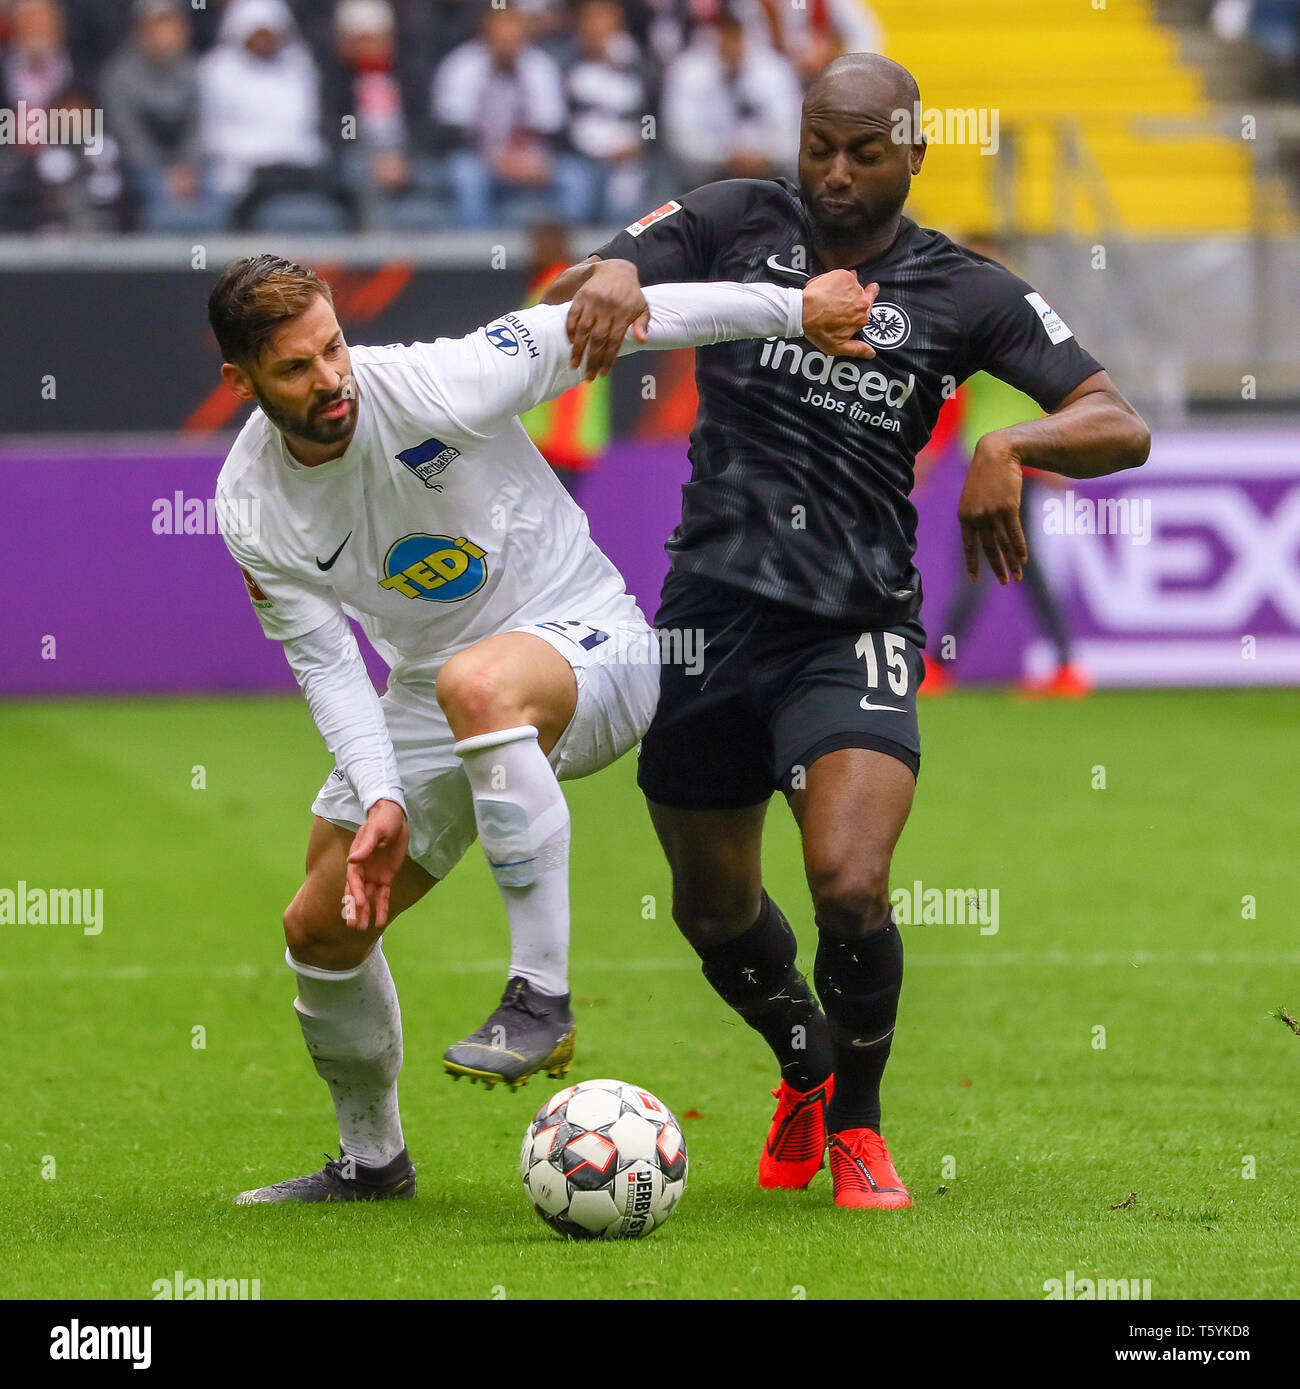 Frankfurt, Germany. 27th Apr, 2019. Marvin Plattenhardt (L) of Berlin vies with Jetro Willems of Frankfurt during the Bundesliga match between Eintracht Frankfurt and Hertha Berlin in Frankfurt, Germany, April 27, 2019. The match ended in a 0-0 draw. Credit: Ulrich Hufnagel/Xinhua/Alamy Live News Stock Photo